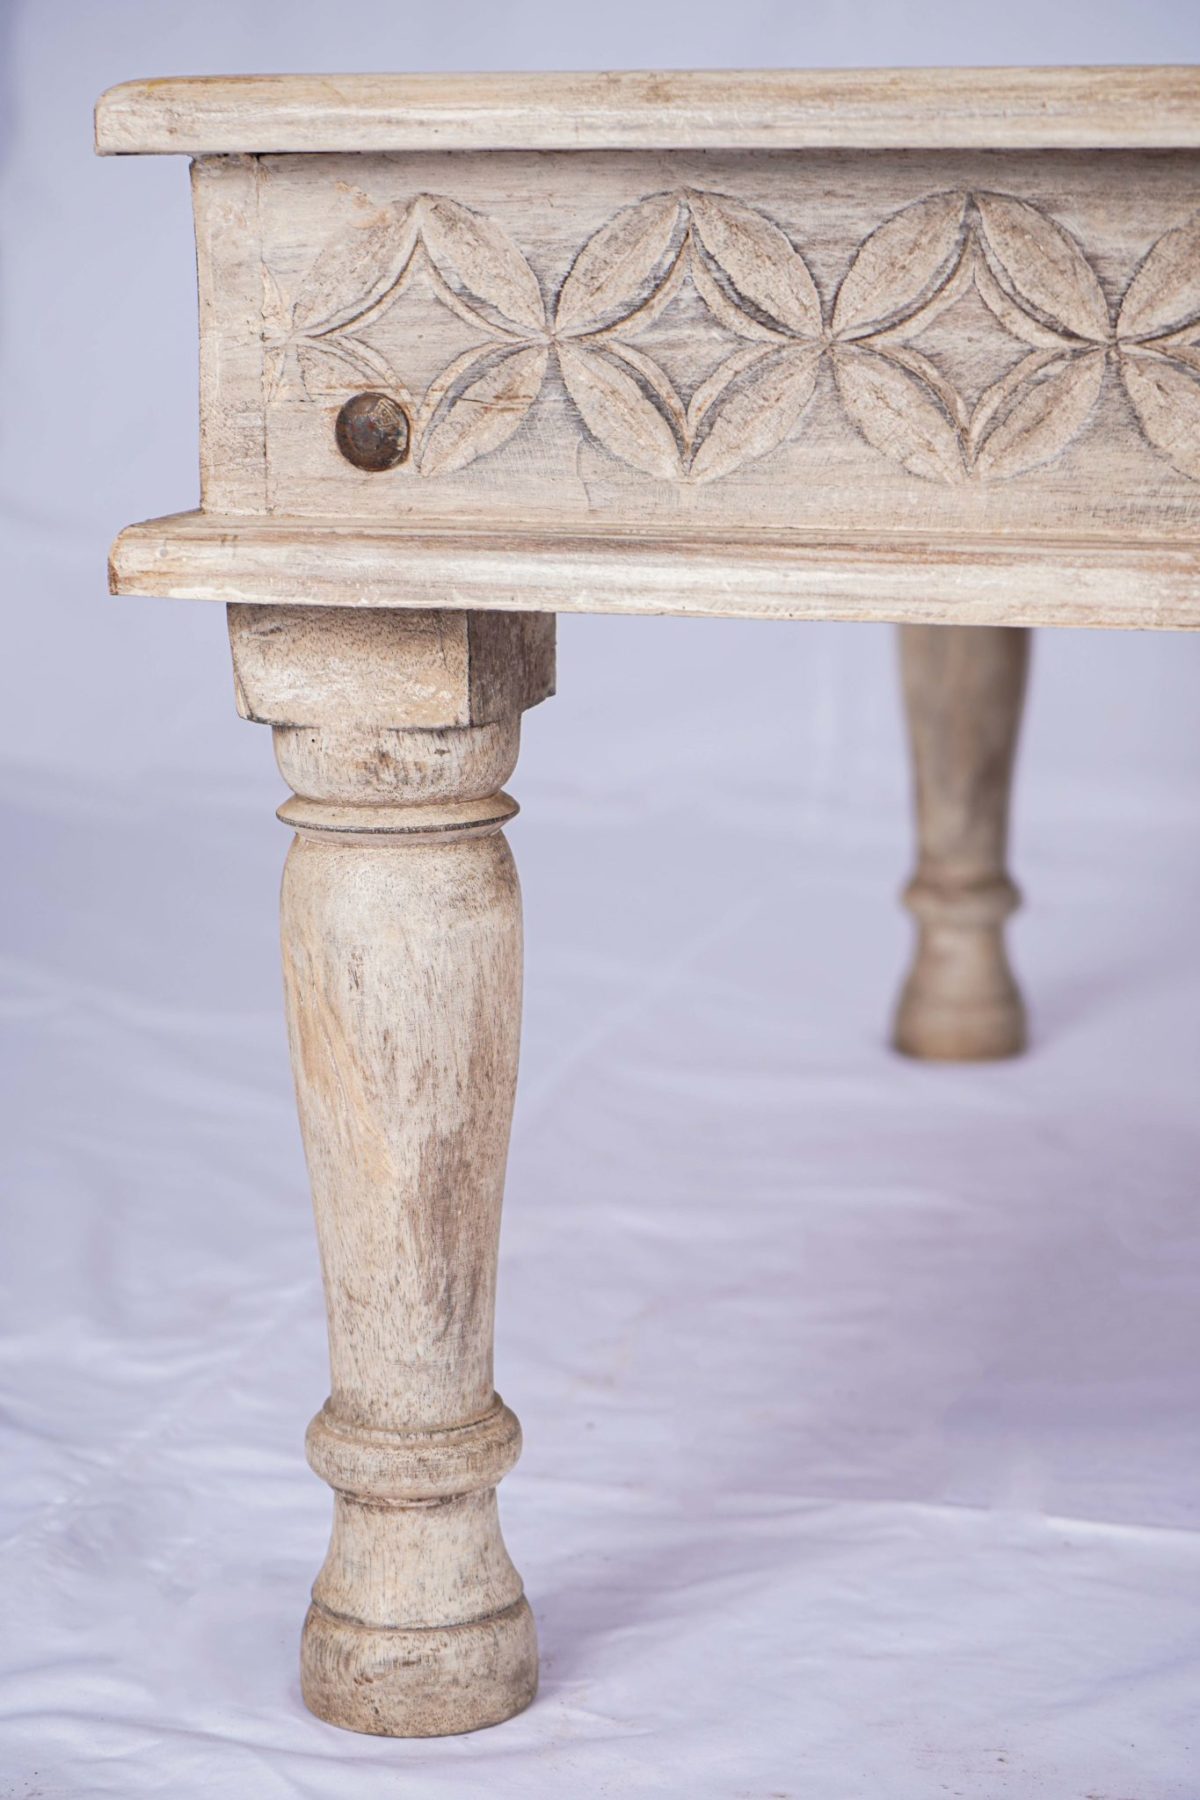 Hand crafted wood furniture from india